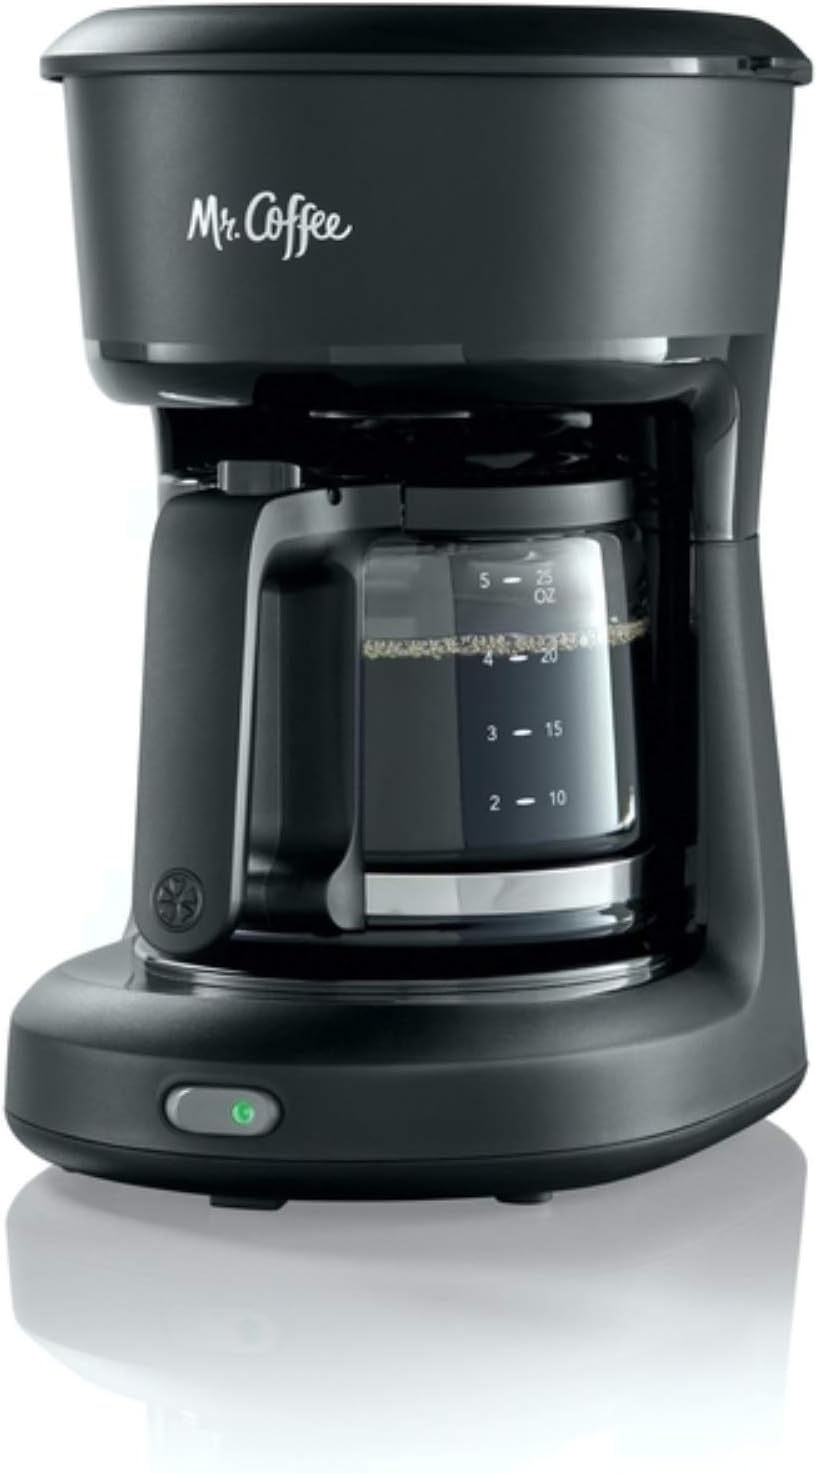 Mr. Coffee 5-Cup Coffee Maker Review